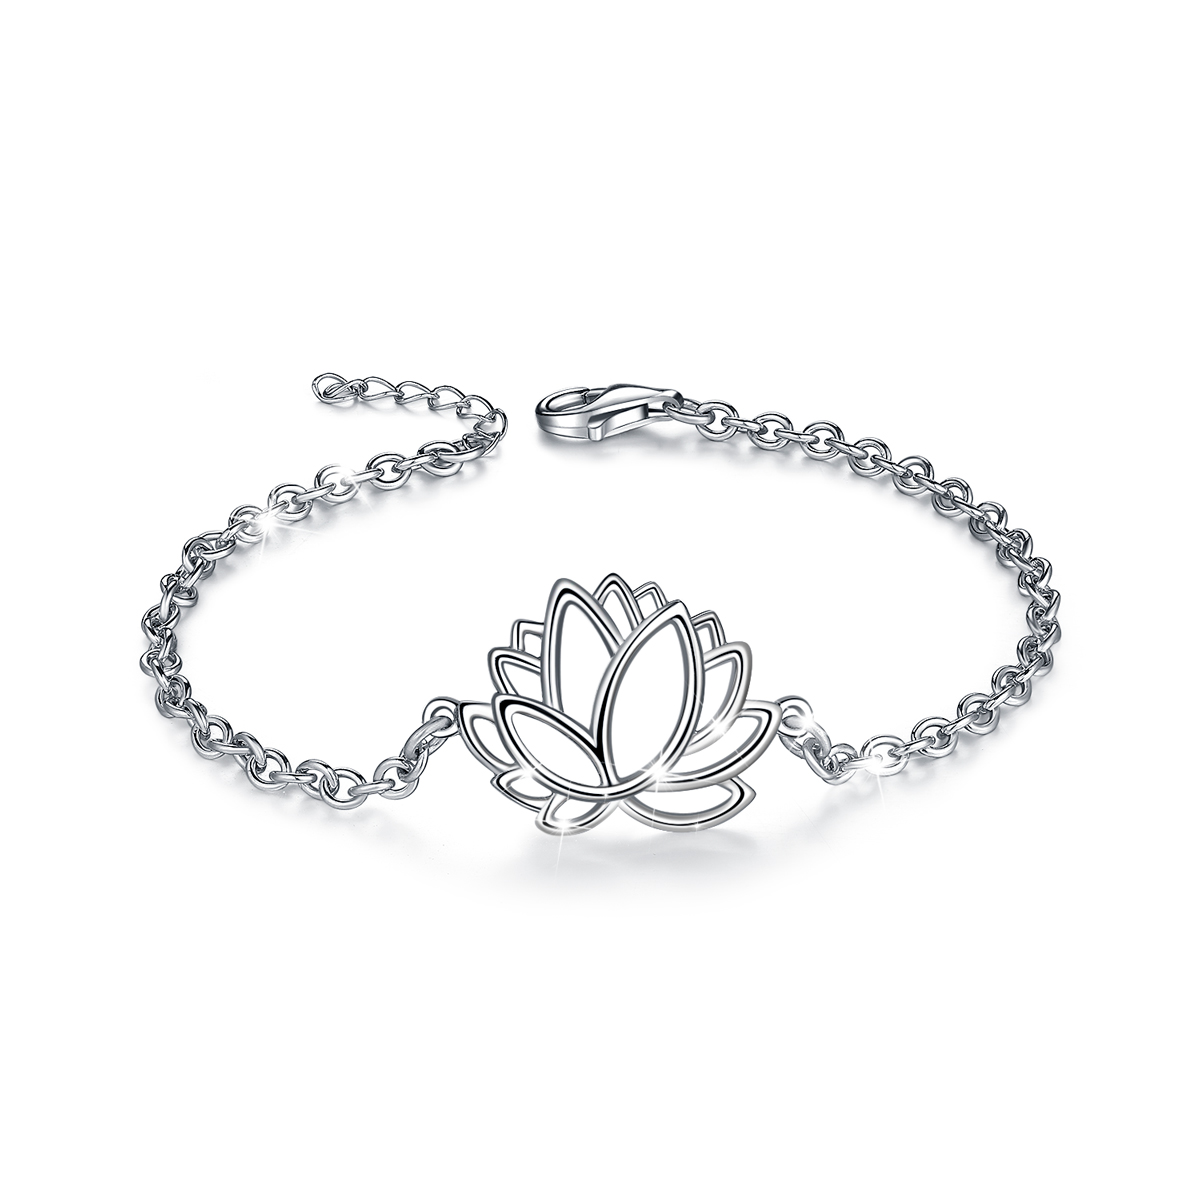 Hollow out Lotus Design 925 Sterling Silver Bracelet by Merryshine Jewelry